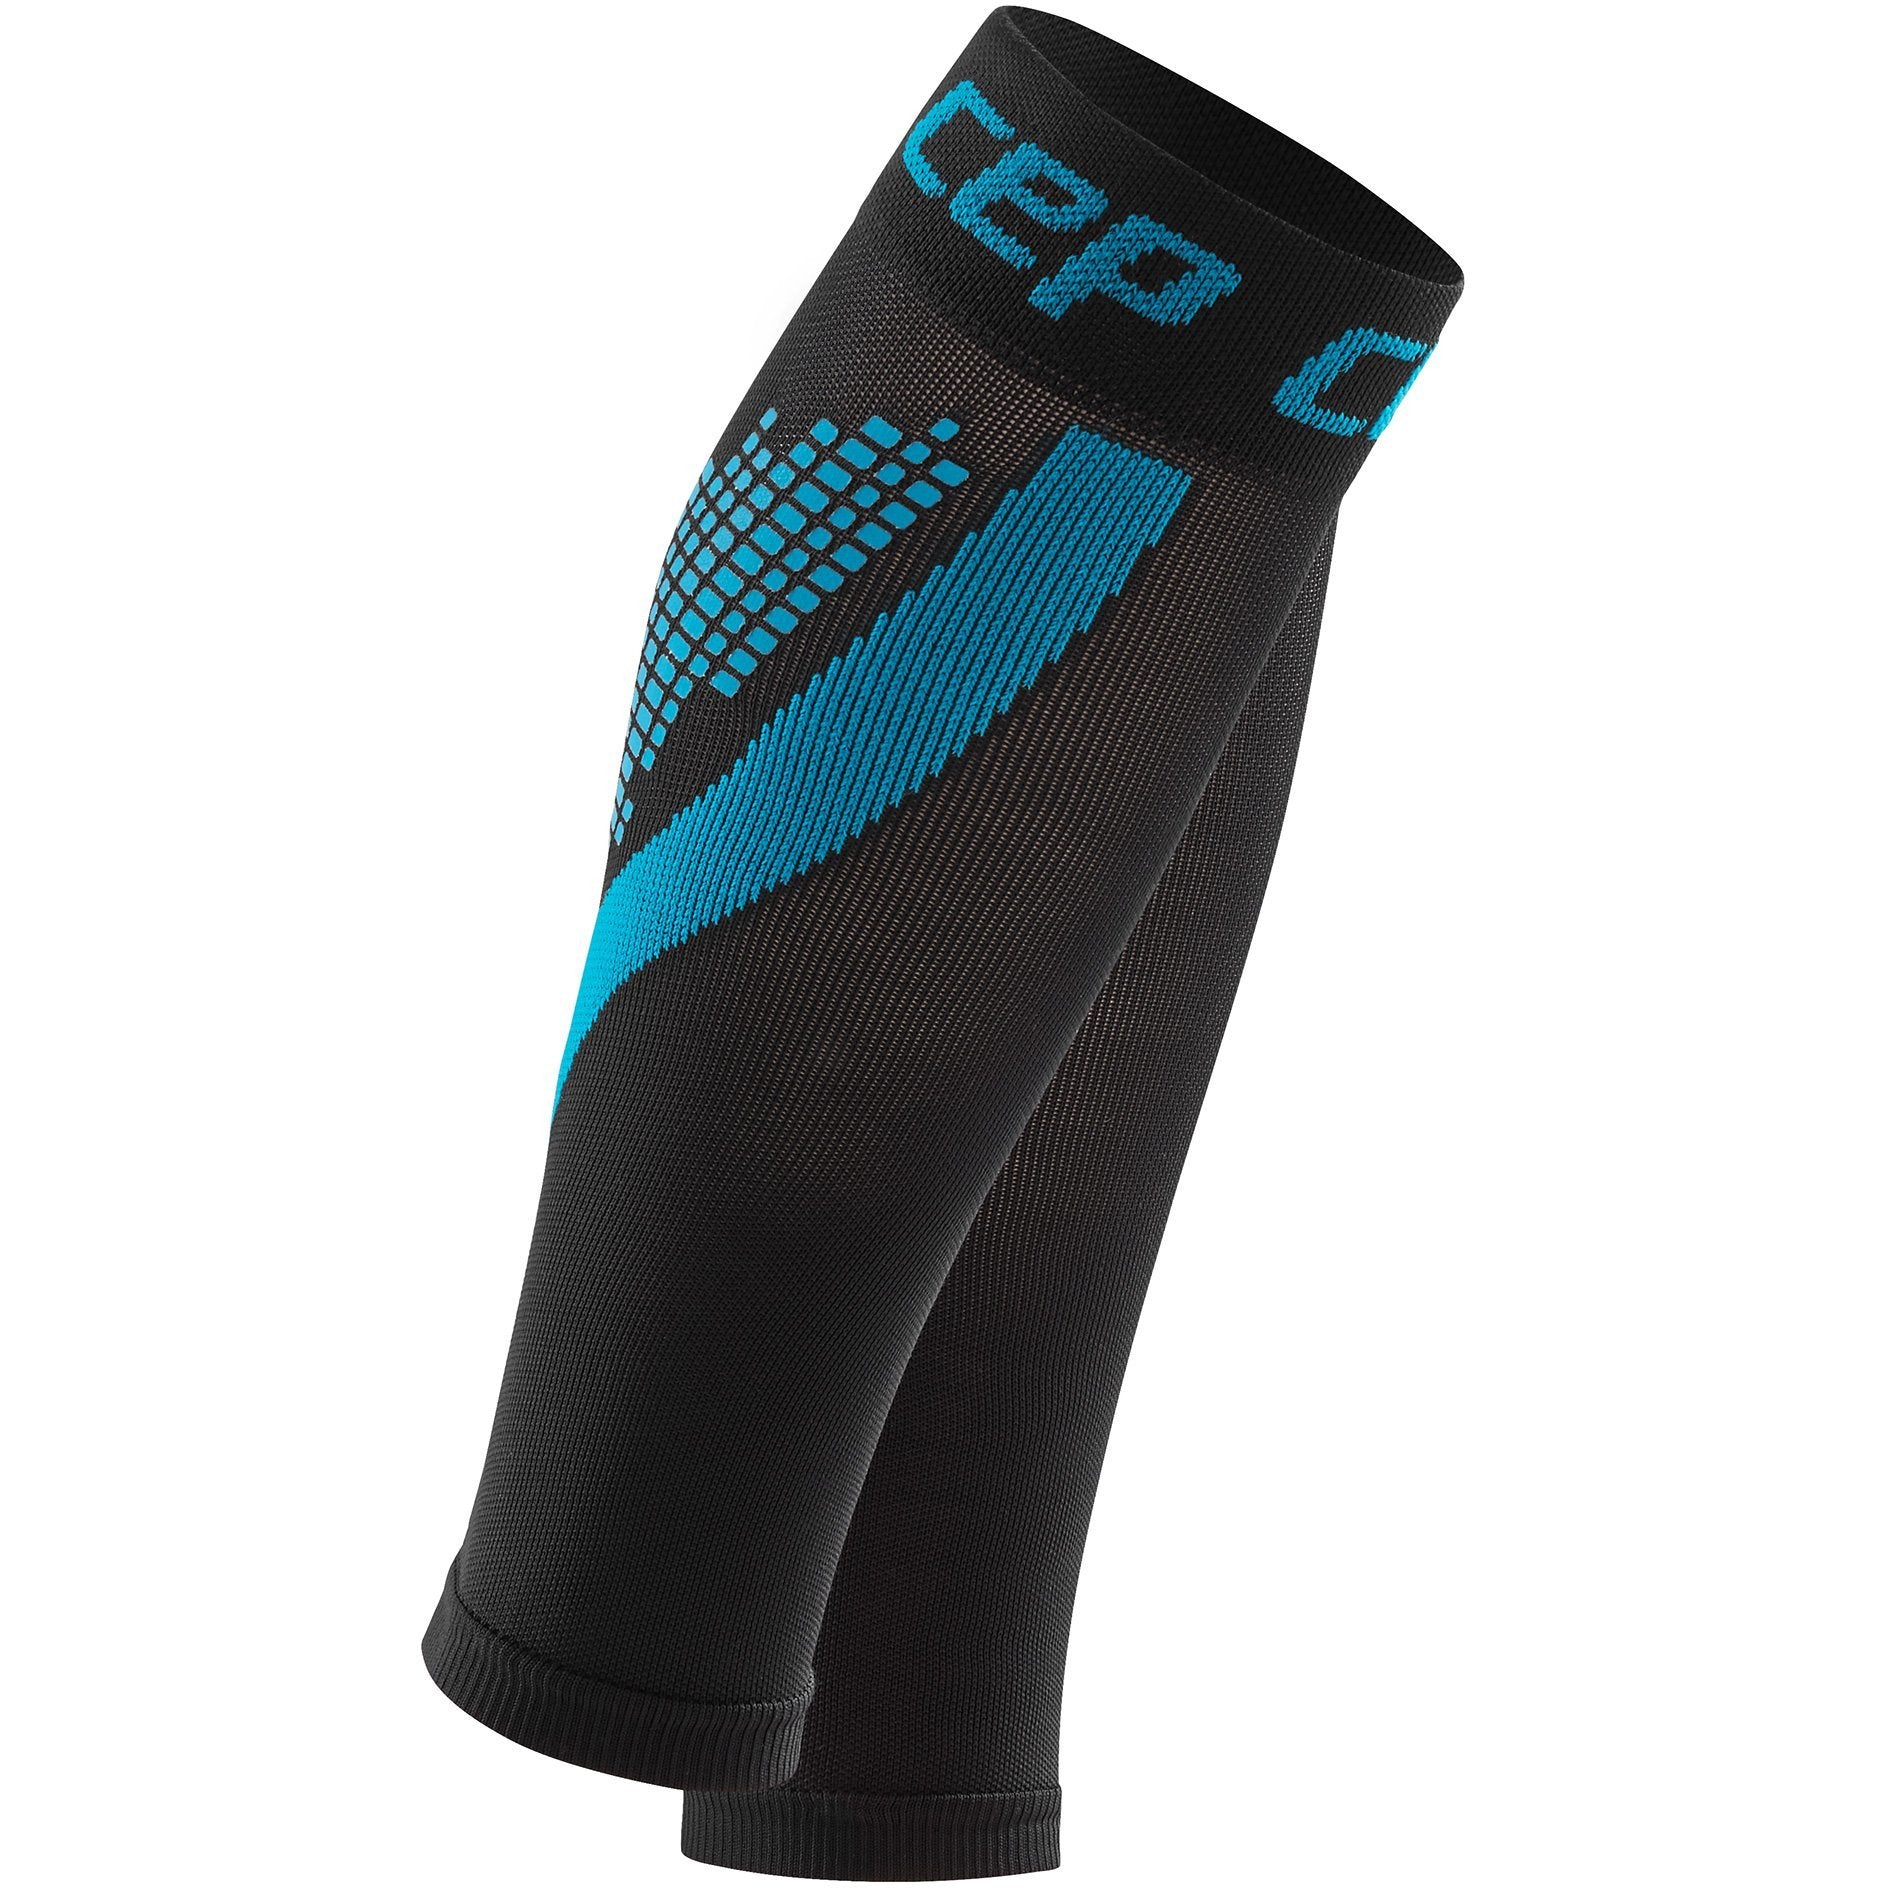 Women's NightTech Compression Sleeves